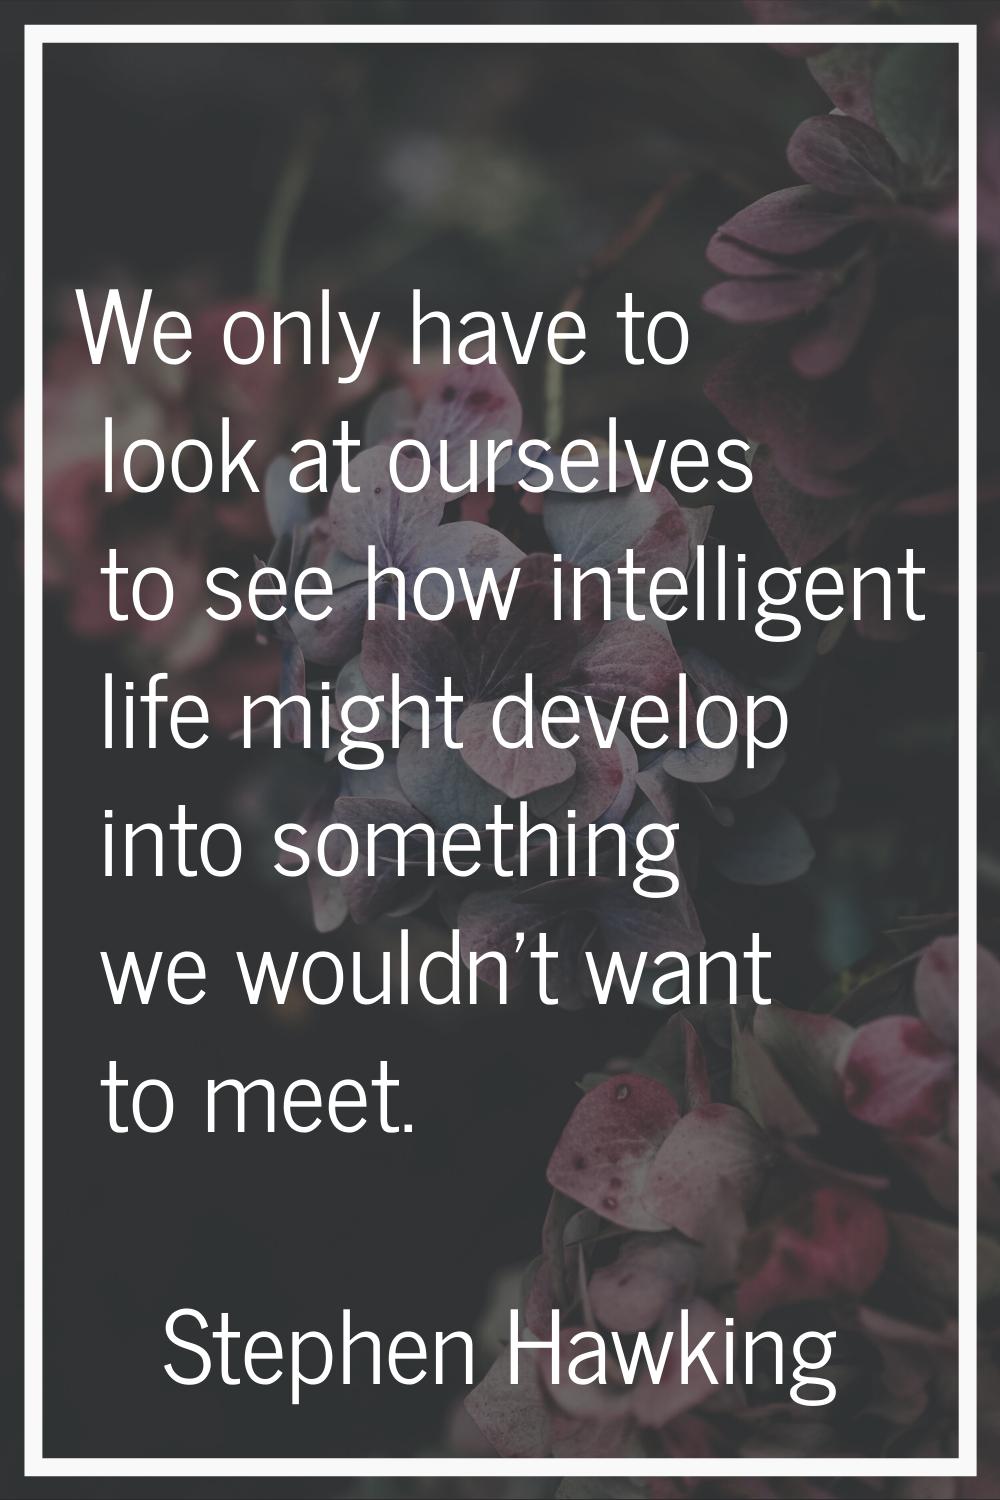 We only have to look at ourselves to see how intelligent life might develop into something we would